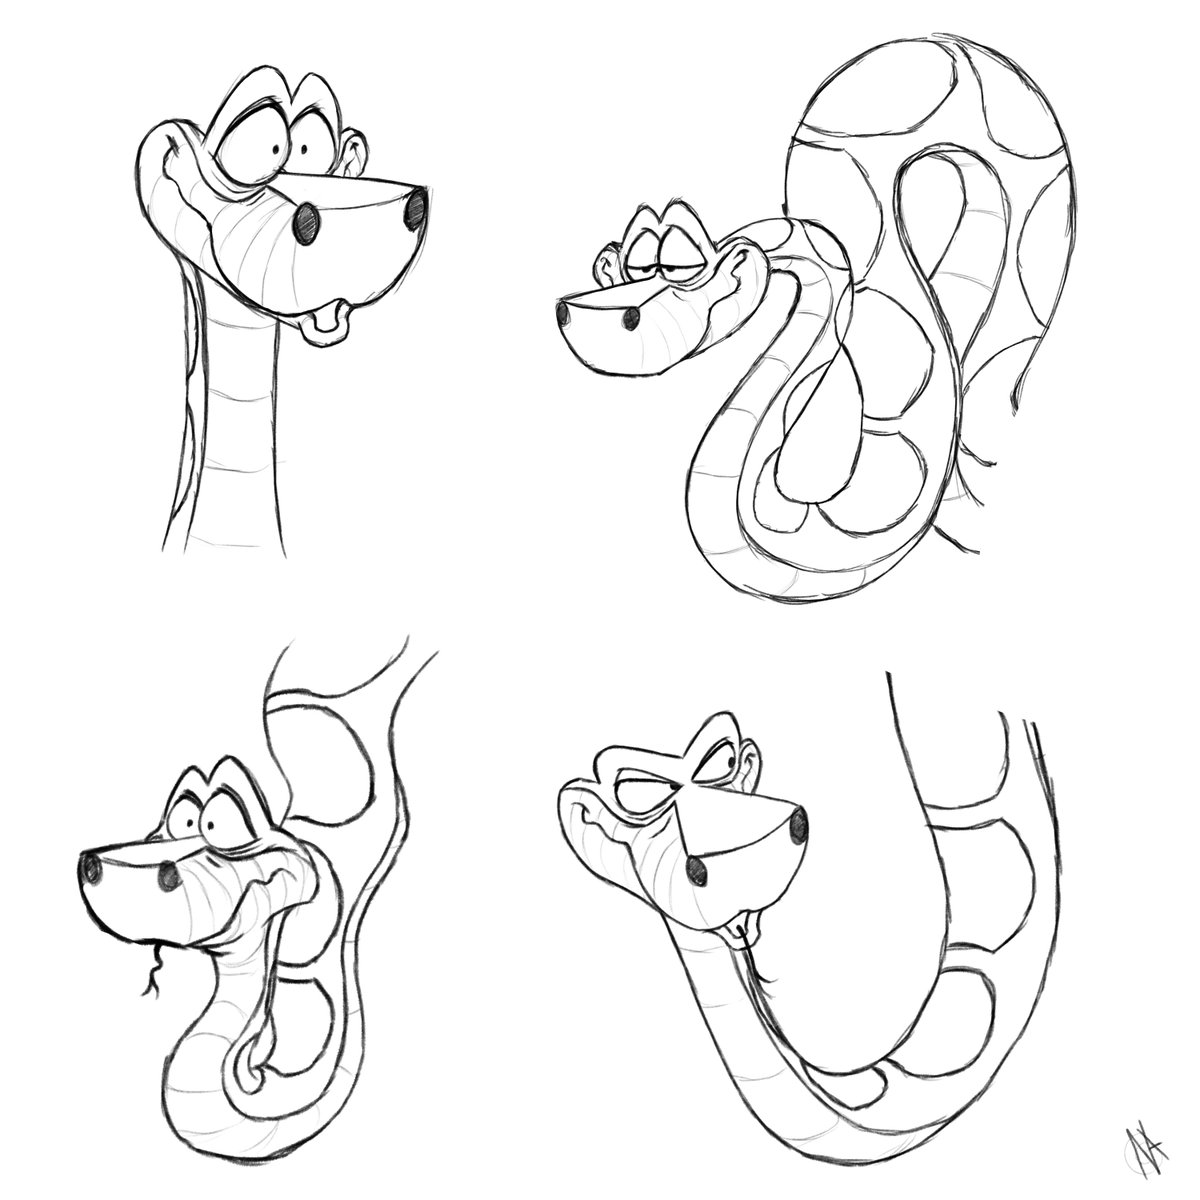 Feelin sssketchy. So here's more Kaa sketches hehe I seriously can't get enough of doodling this goofy noodle. :3